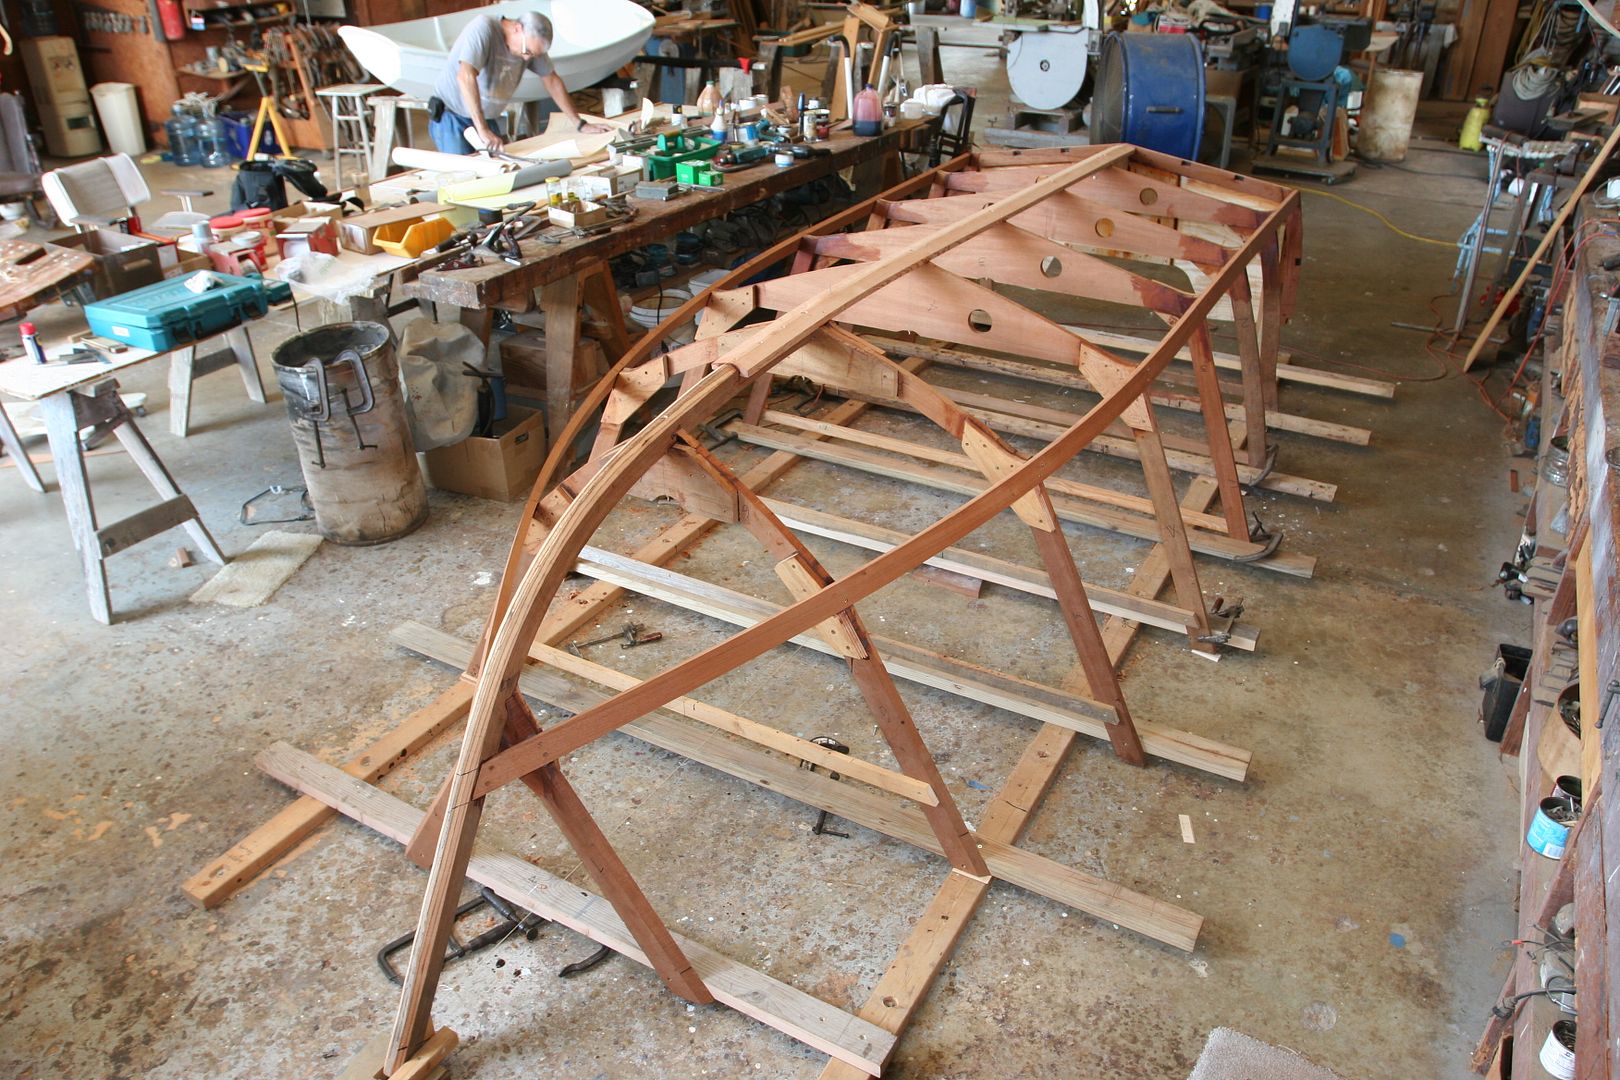 Building a Luzier 16' Outboard Skiff, designed by George Luzier ...